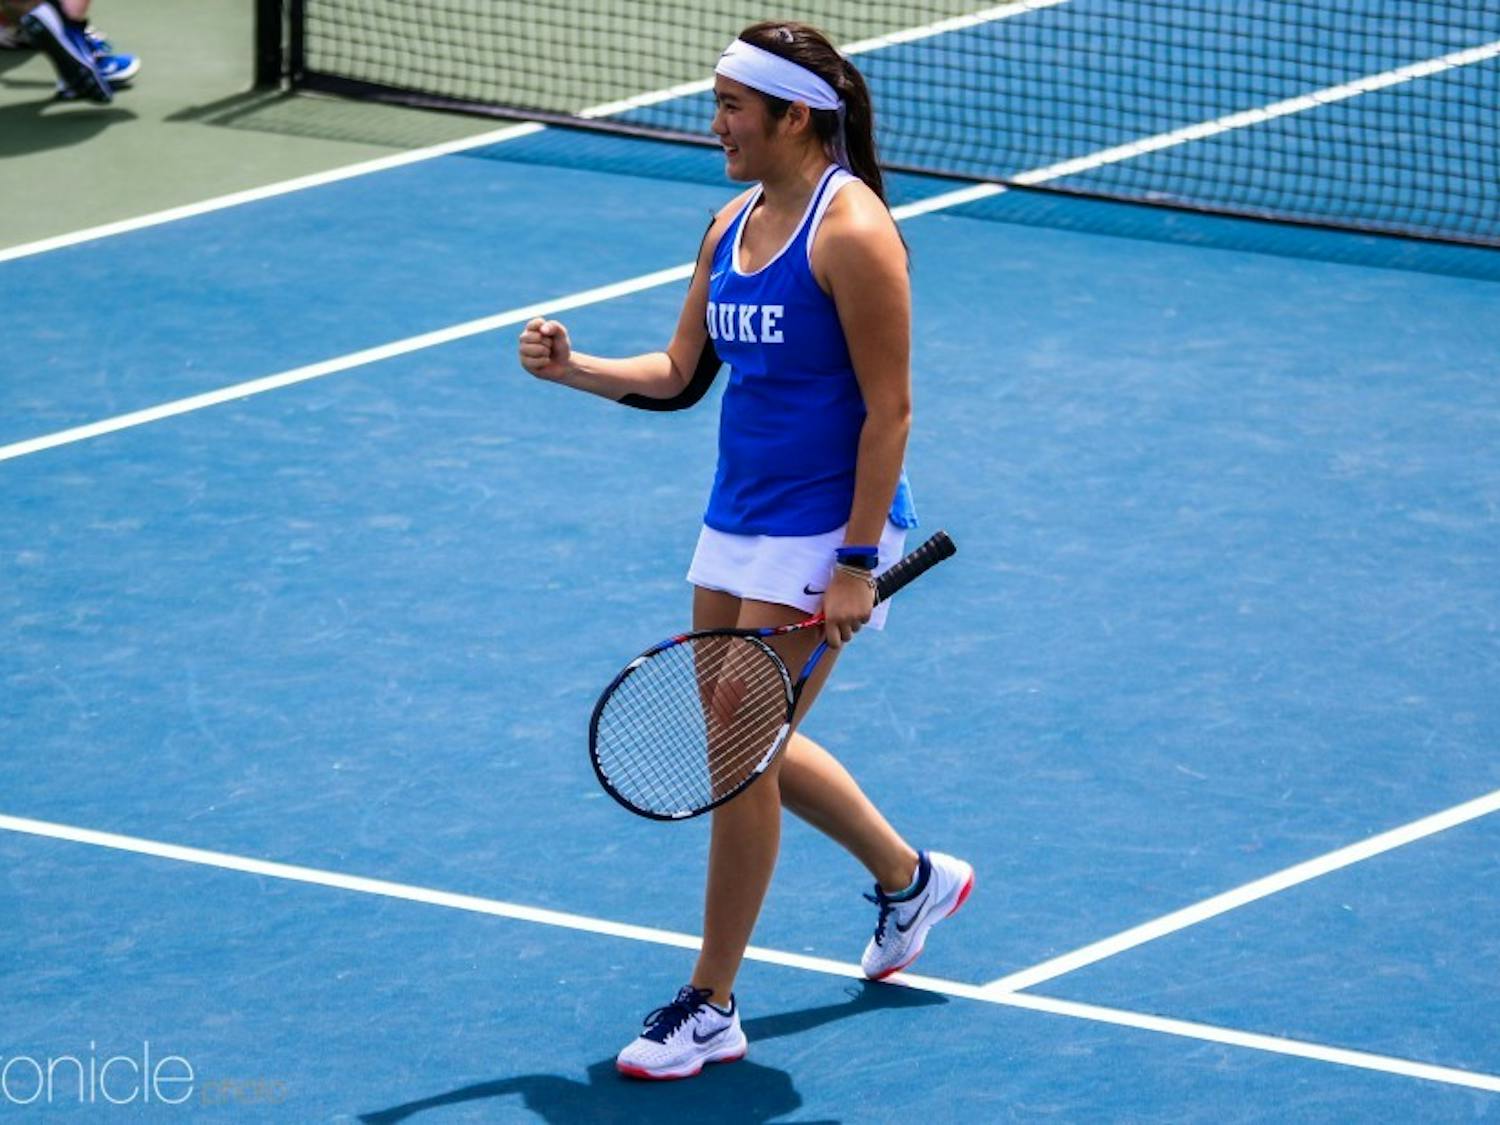 Junior Kelly Chen secured her third consecutive ITA All-American selection.